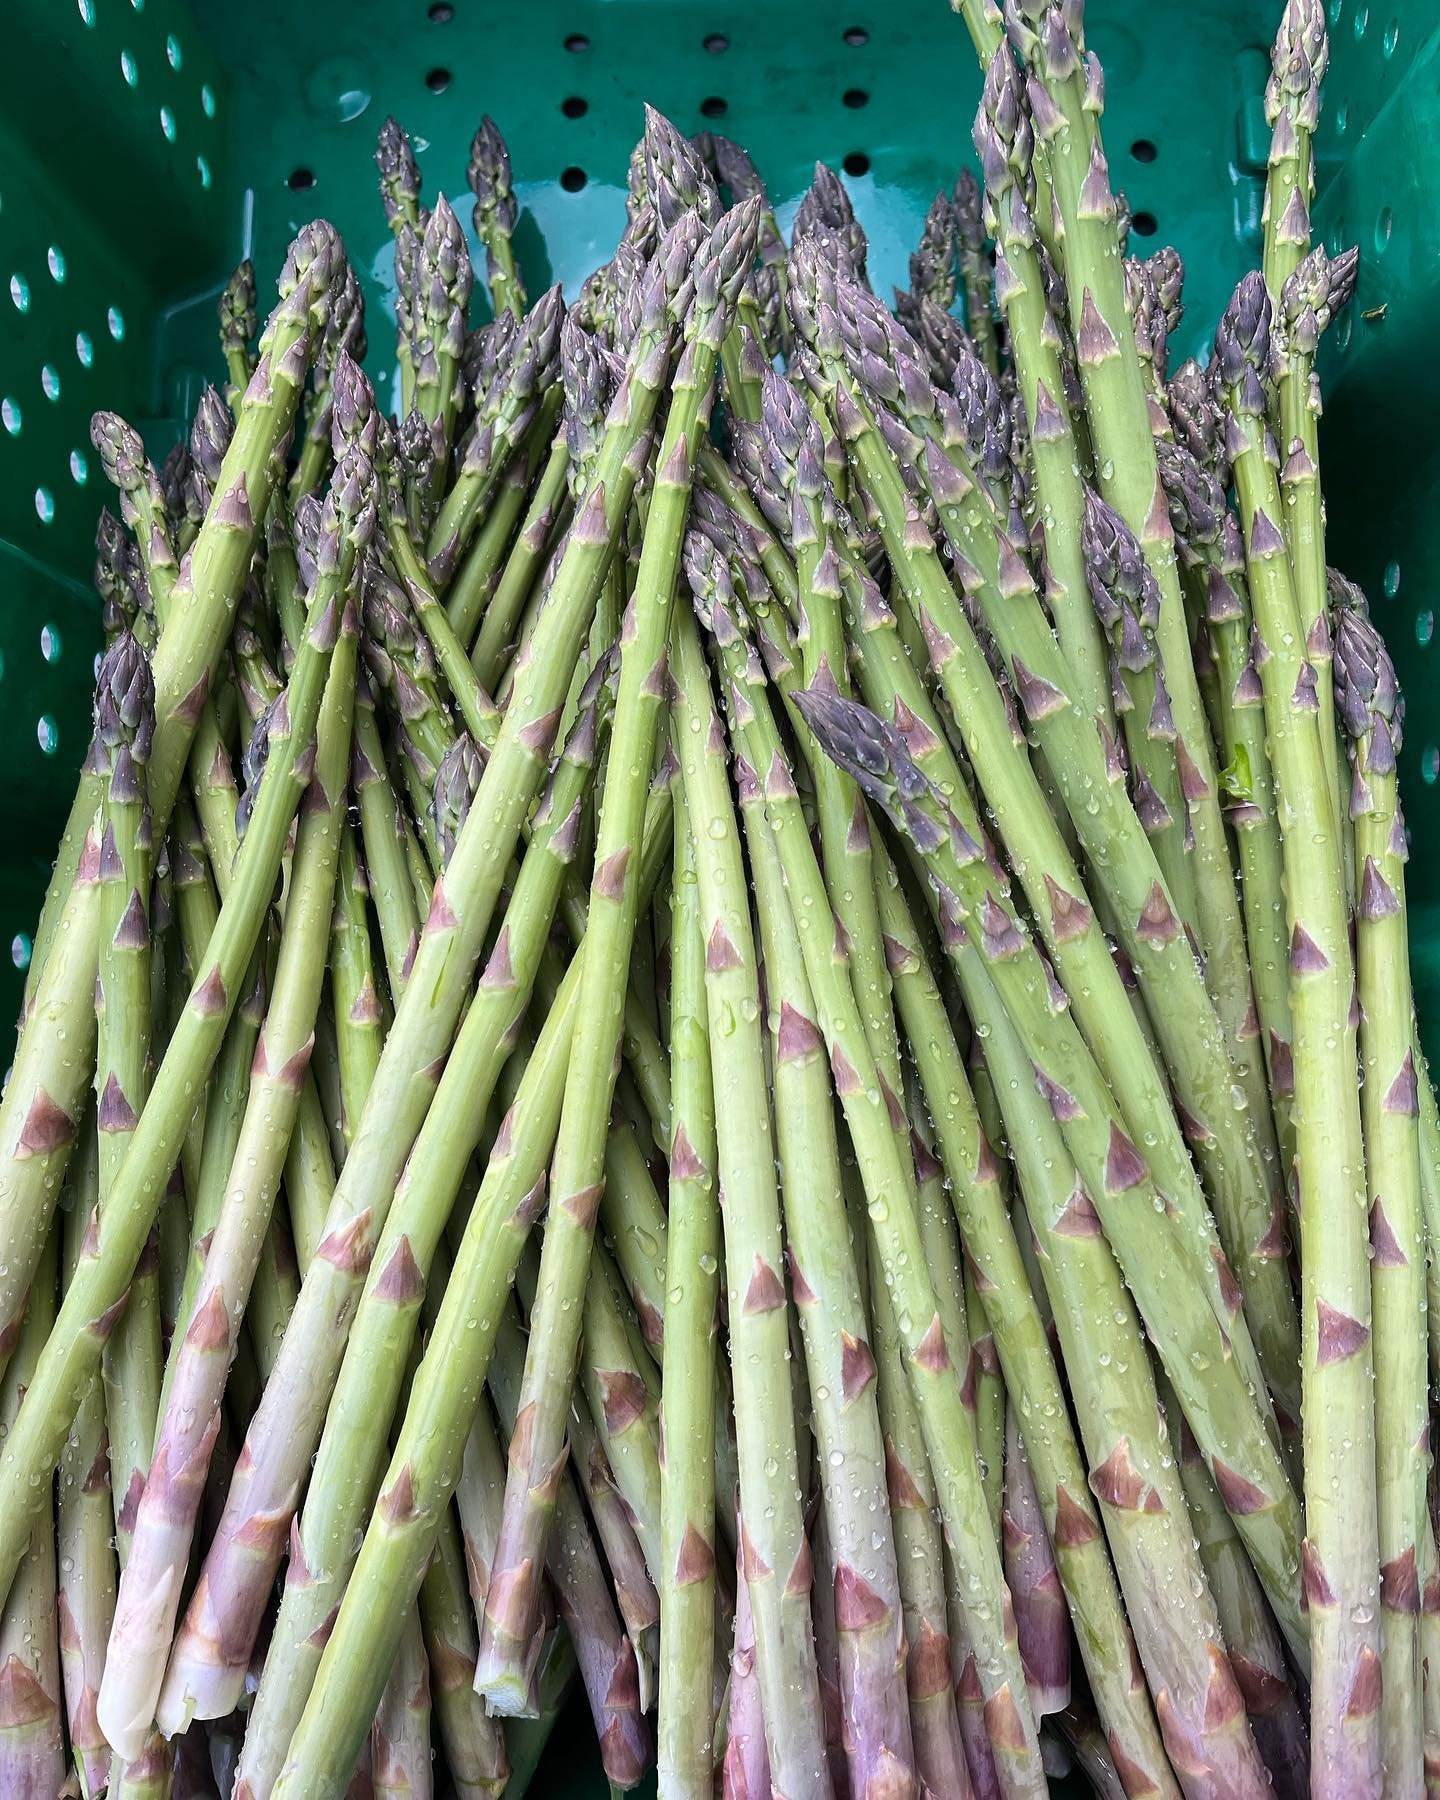 Greetings to our strawberry and asparagus customers! 

💚First &ndash; asparagus:
We now have fresh asparagus on the farm for four dollars a pound starting Friday, May 10 (9am til 5pm). We will also be open this coming Sunday-Mother&rsquo;s Day.
We s